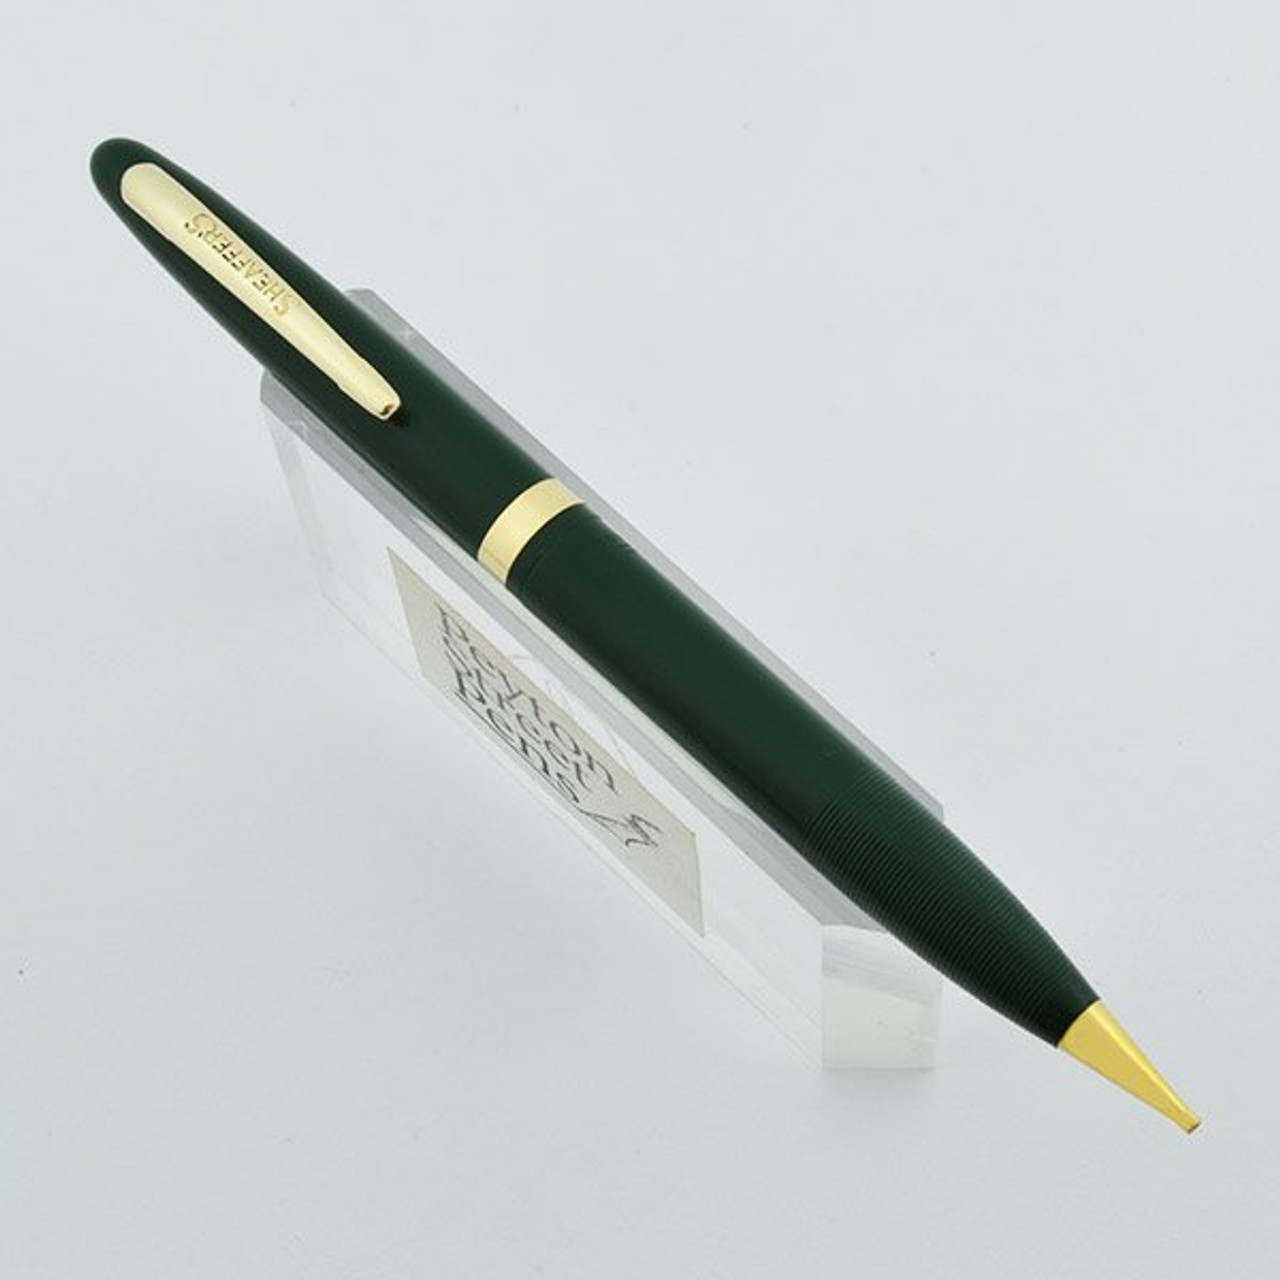 Sheaffer Admiral Mechanical Pencil (1940s) - Green, Gold Trim (Excellent, Works Well)